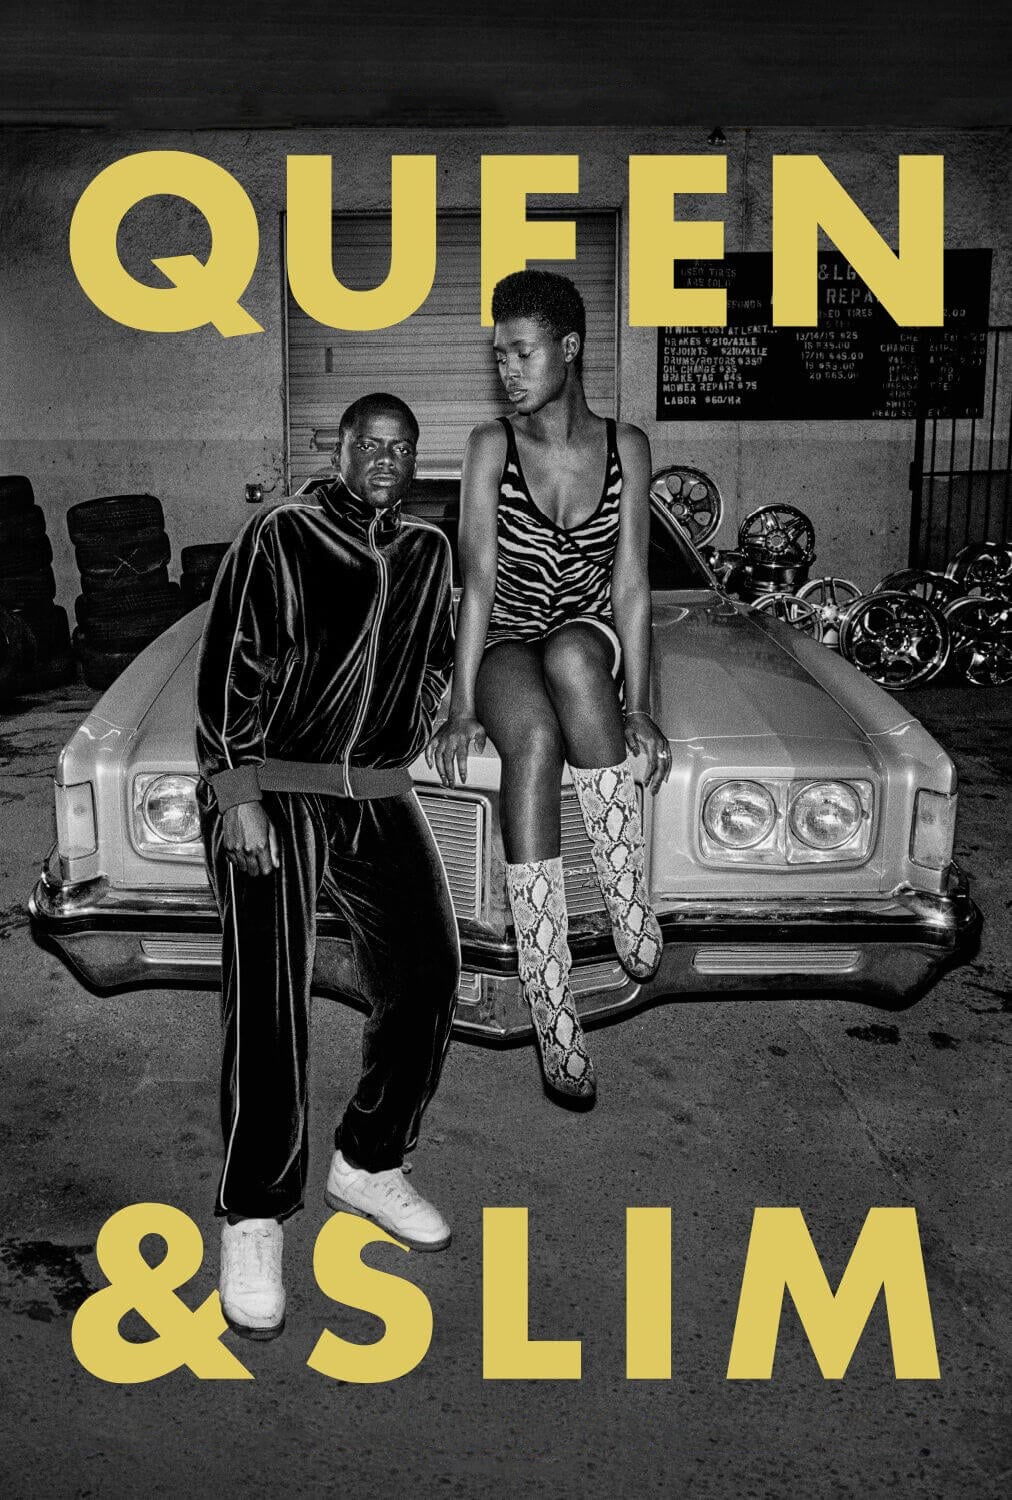 Poster for the movie "Queen & Slim"